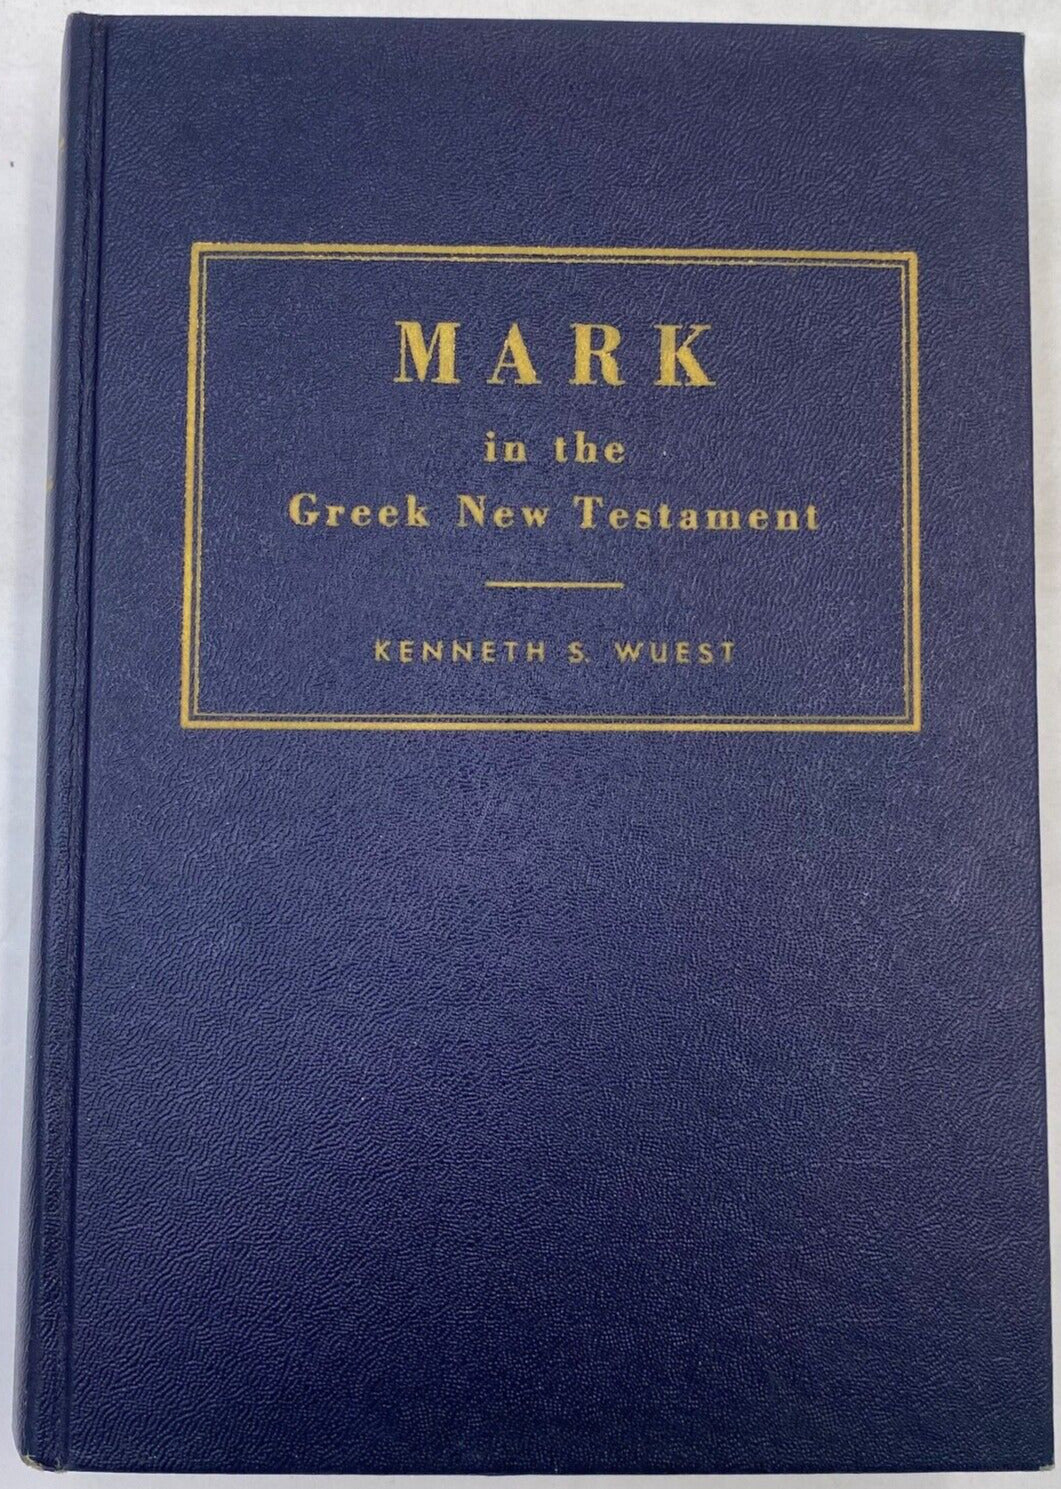 Mark in the Greek New Testament by Kenneth S. Wuest  1953